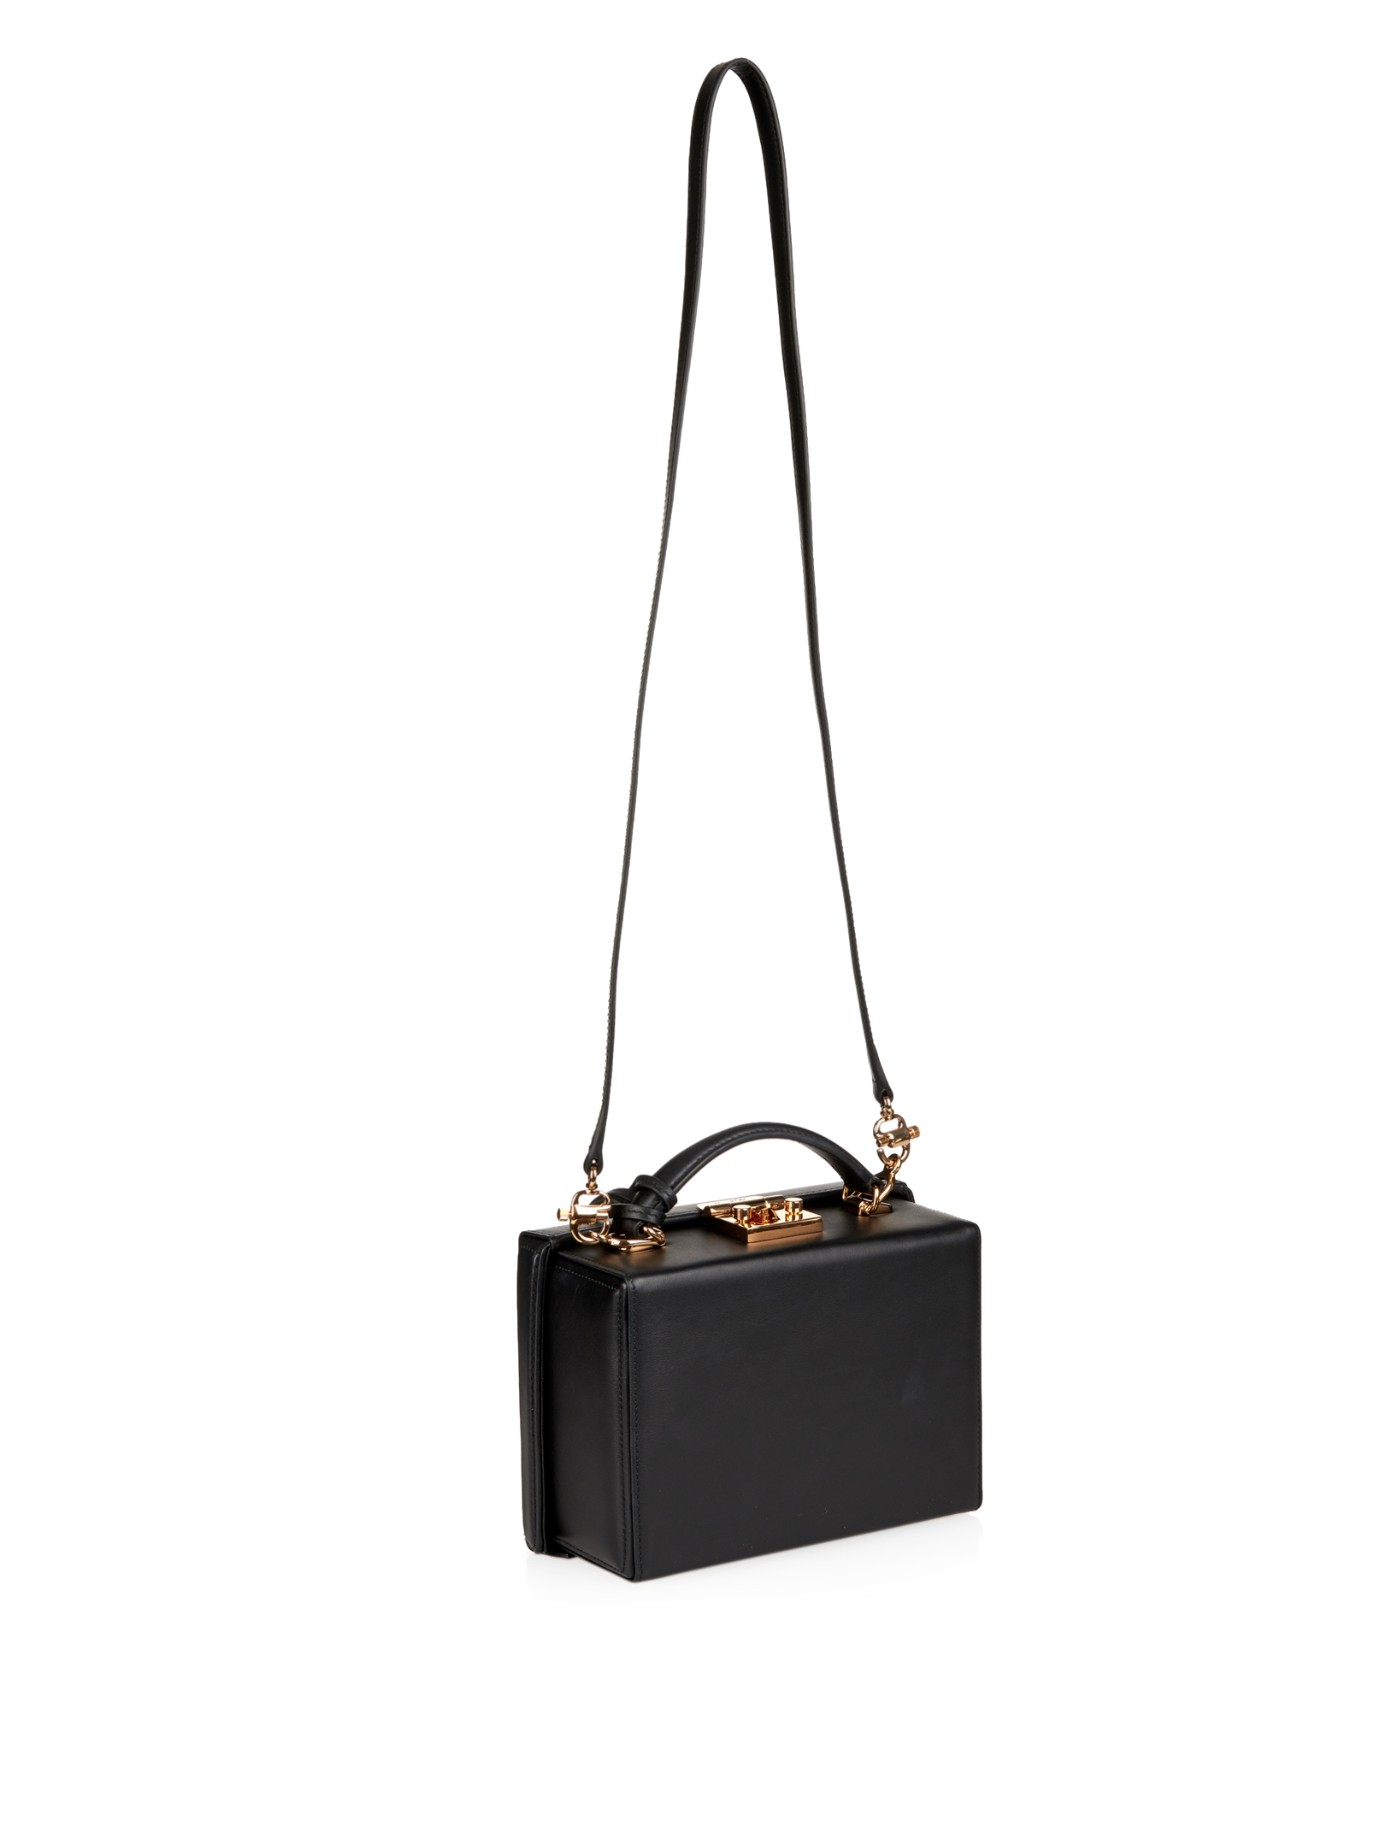 Mark Cross Grace Small Leather Box Bag in Black - Lyst